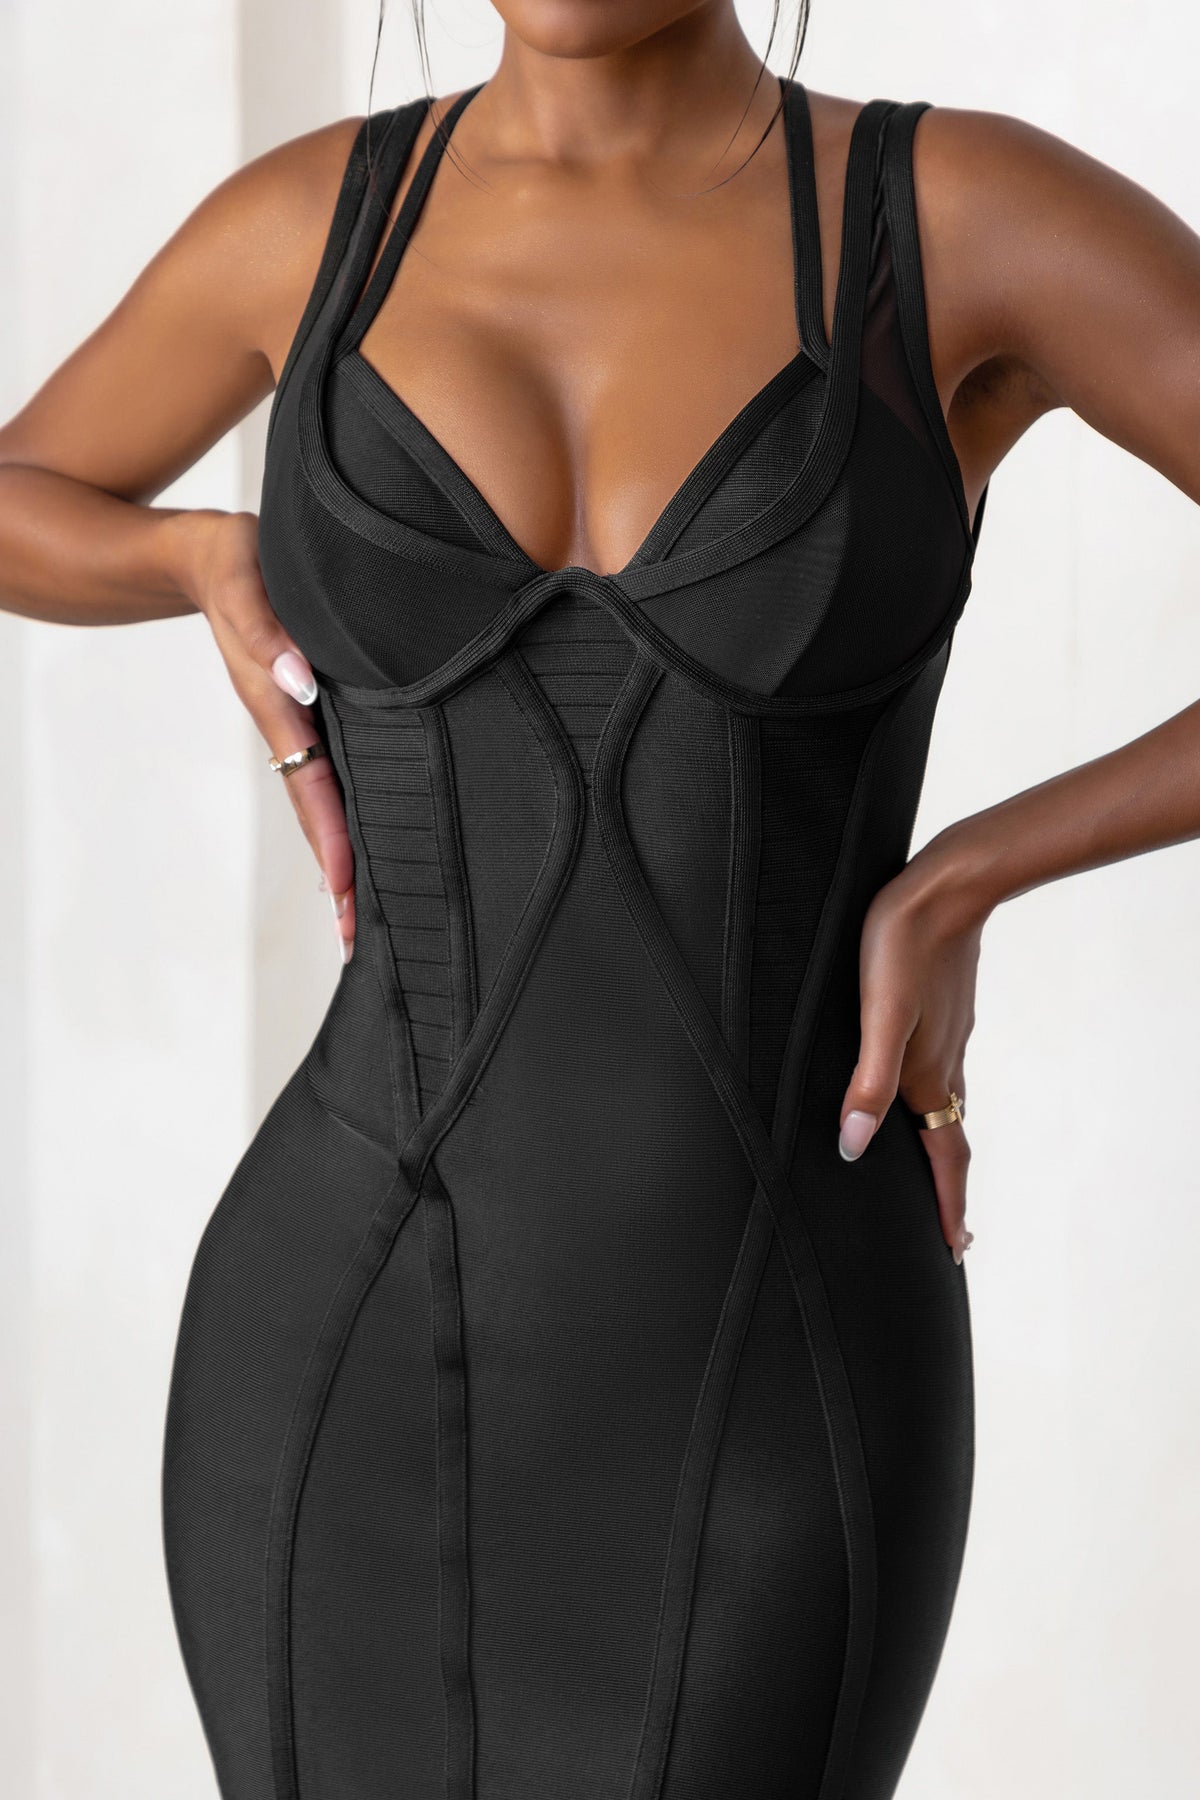 Bodycon Collection  Home of Bandage & Bodycon Dresses